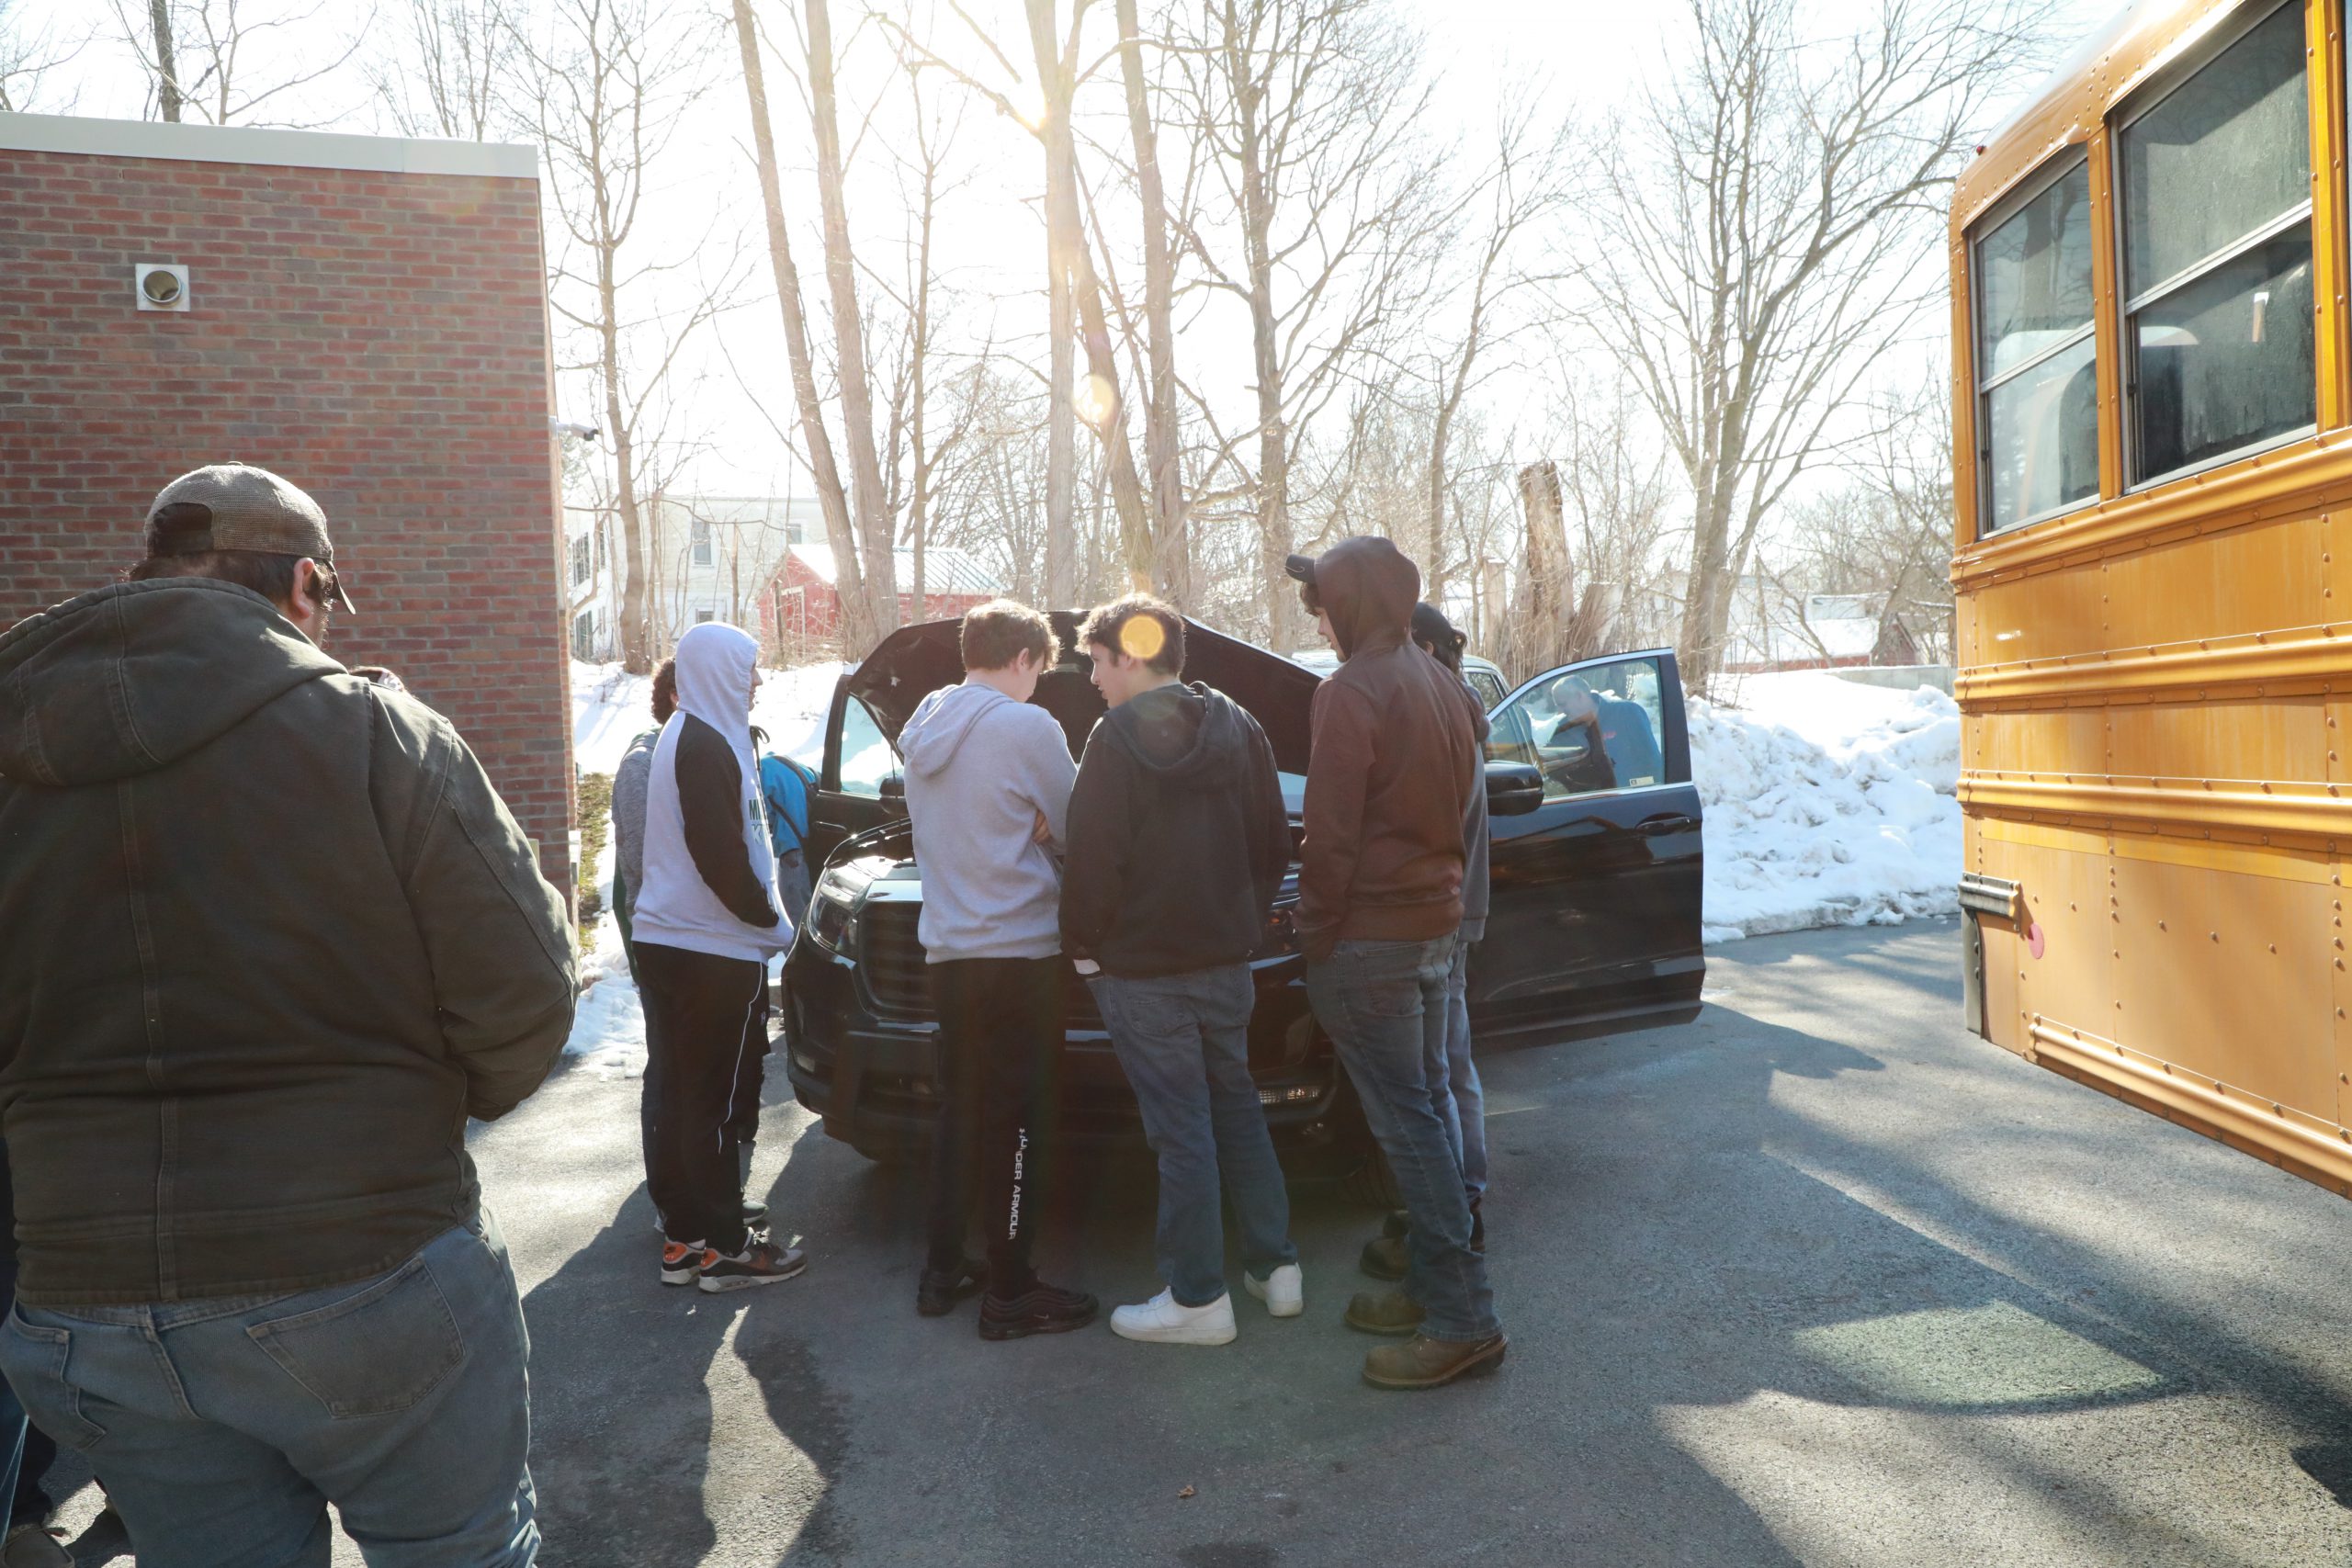 Students gather around a car with an open hood.